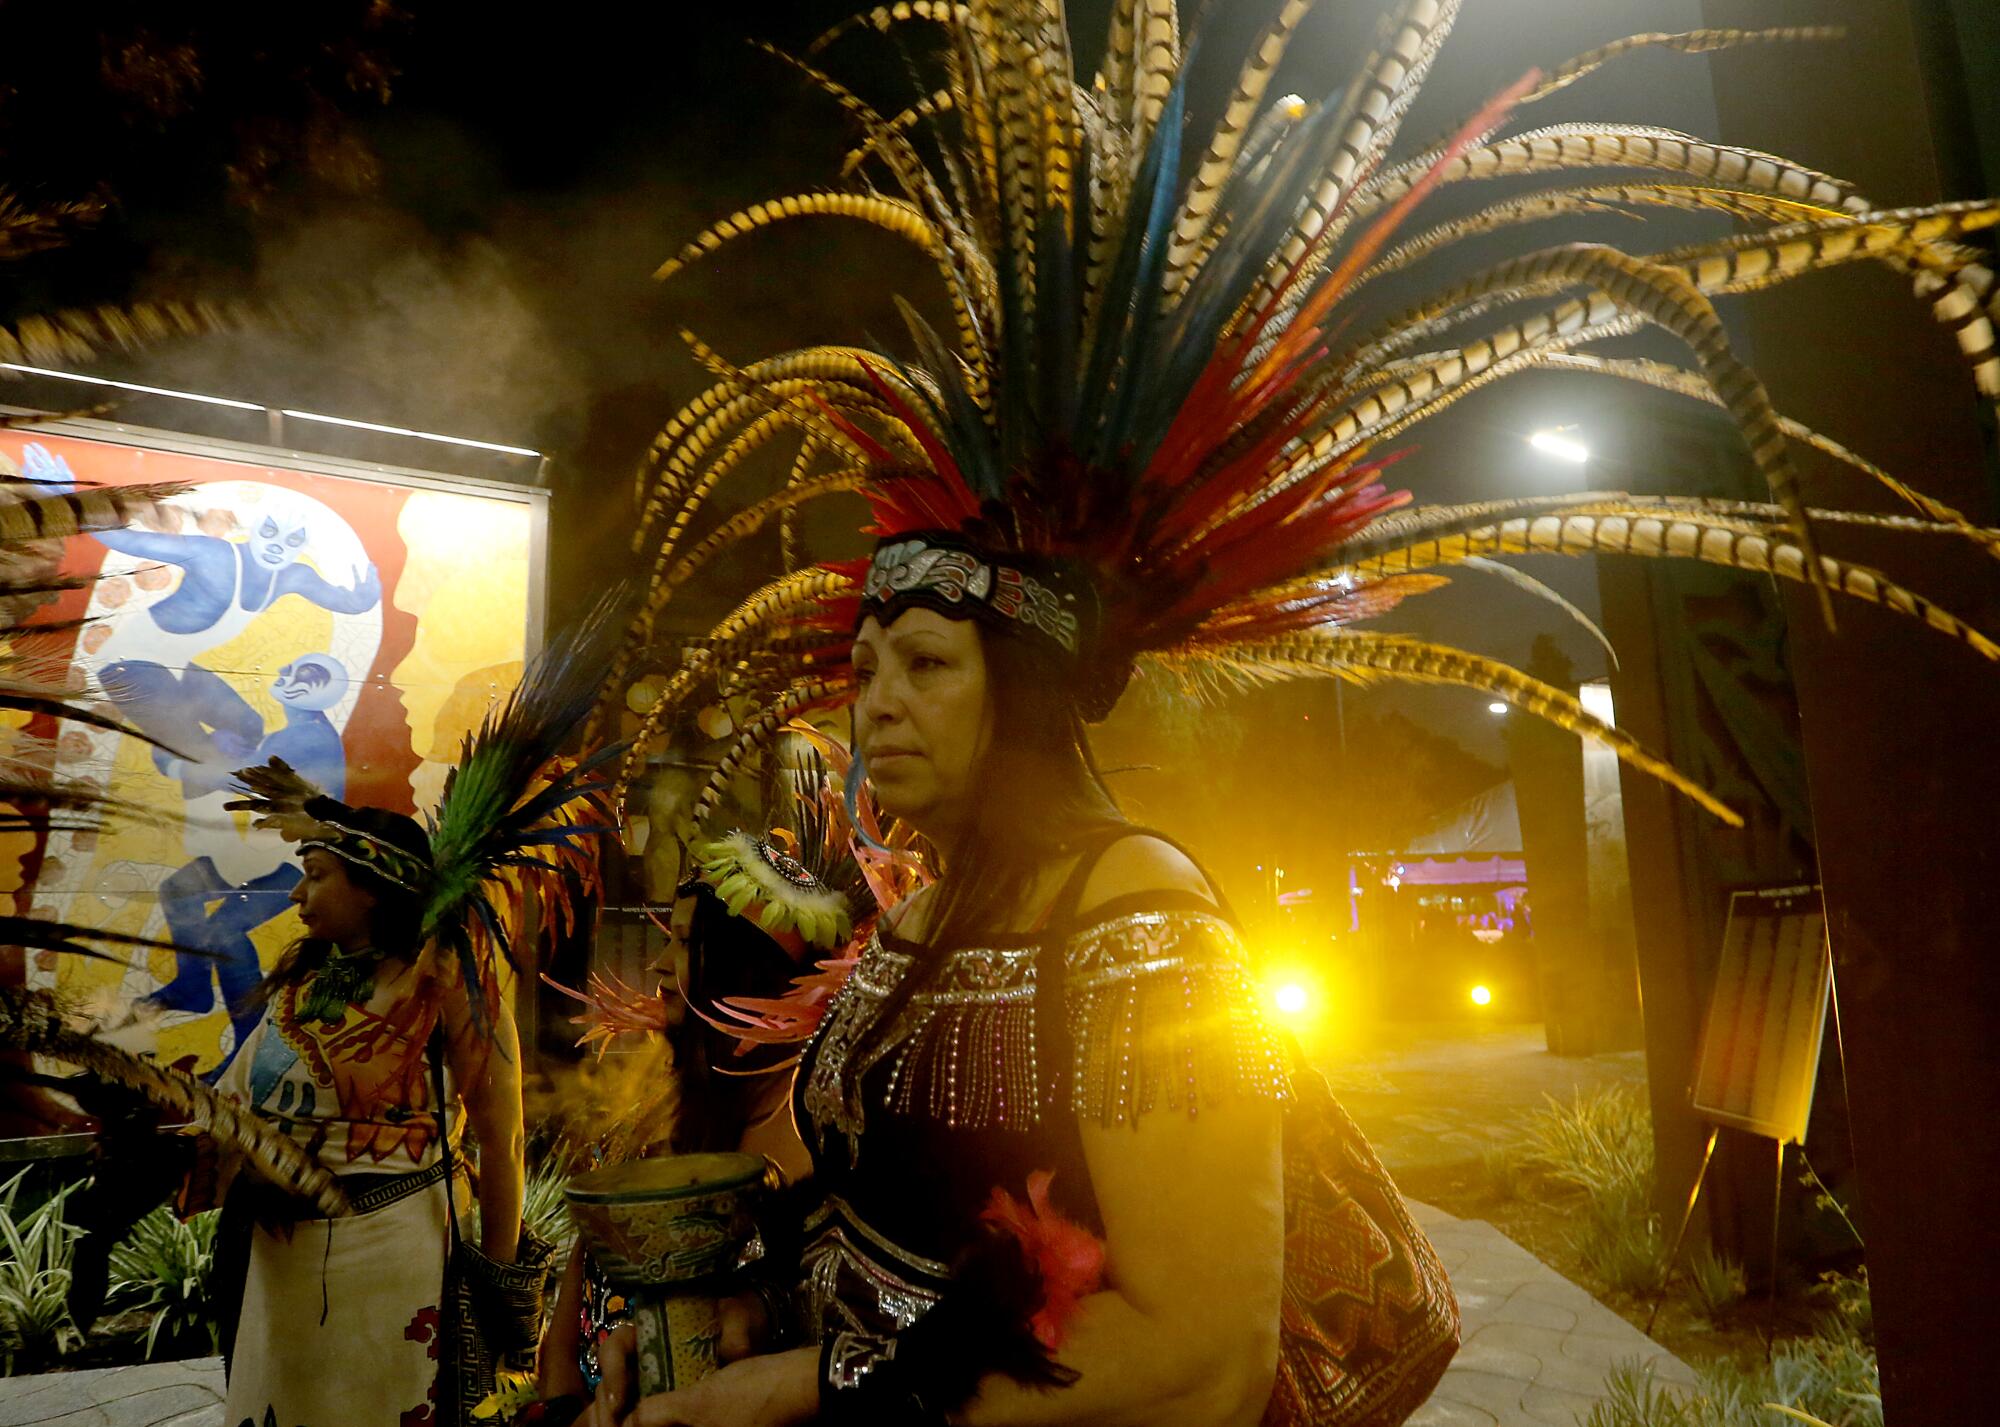 People in colorful headdresses and clothing.